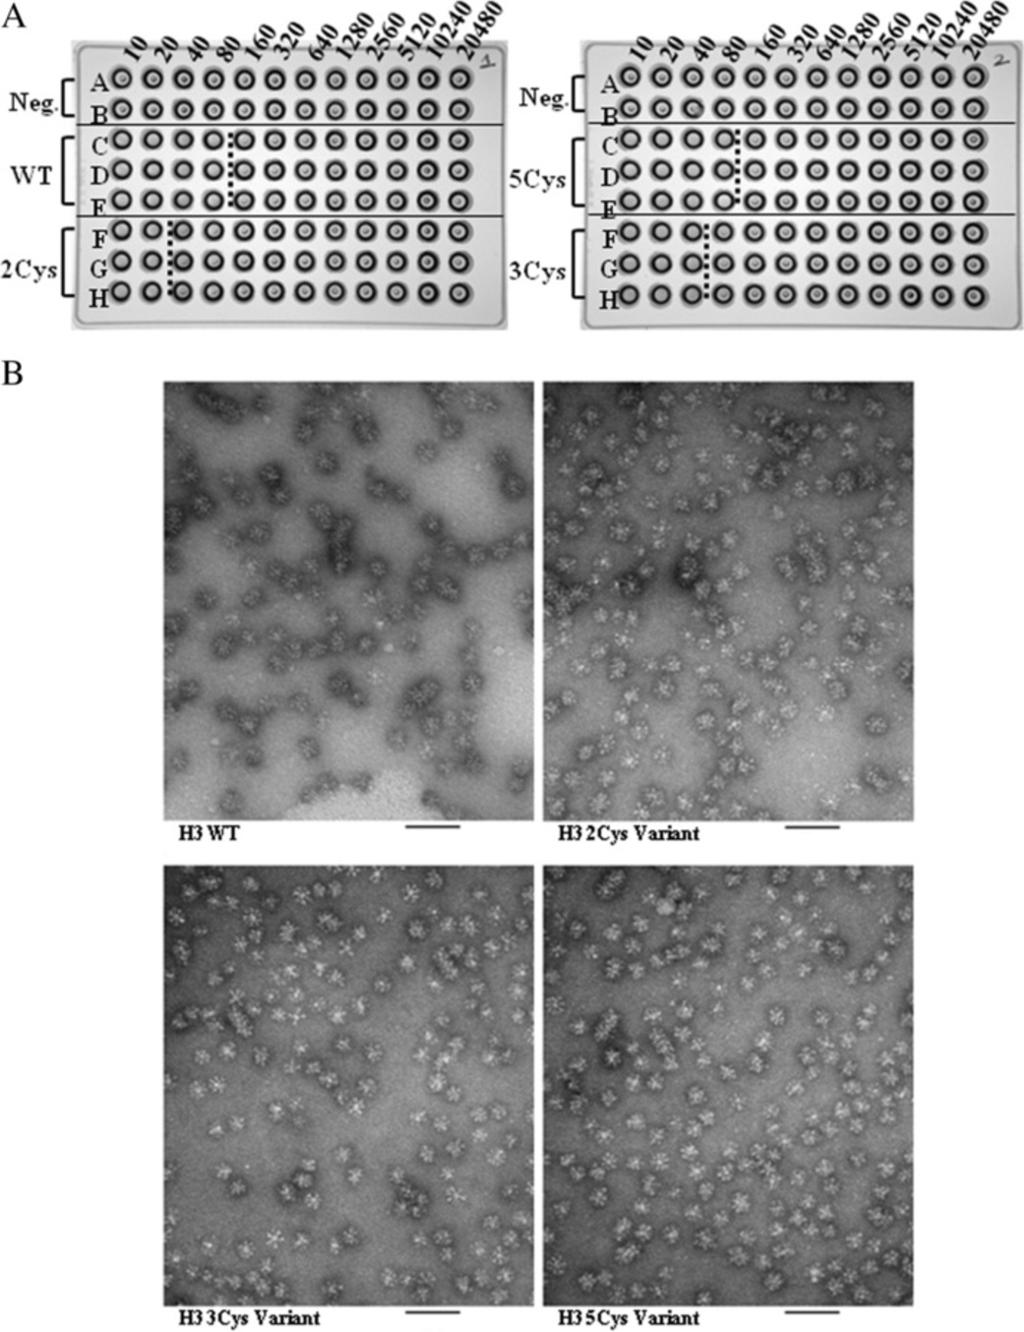 Holtz et al. BMC Biotechnology (2014) 14:111 Page 5 of 20 Figure 3 A and B Hemagglutination activity and negative stain electron microscopy of the H3 rha proteins. A. The hemagglutination assay was performed in 96-well u-bottom plates.